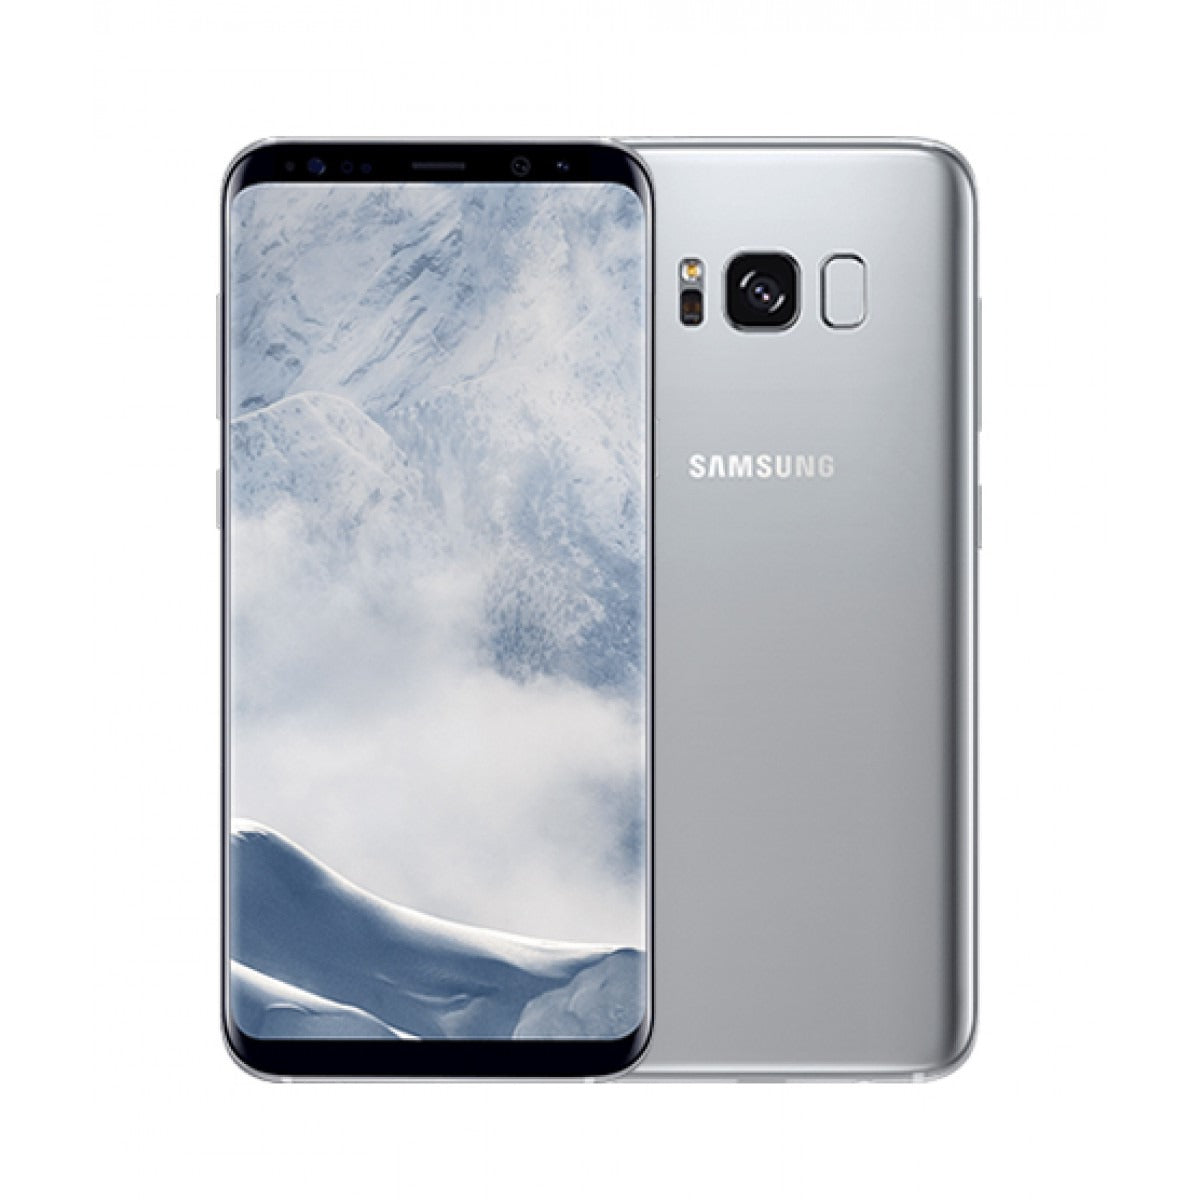 Samsung Galaxy S8+ - 64 GB - Arctic Silver - T-Mobile - GSM